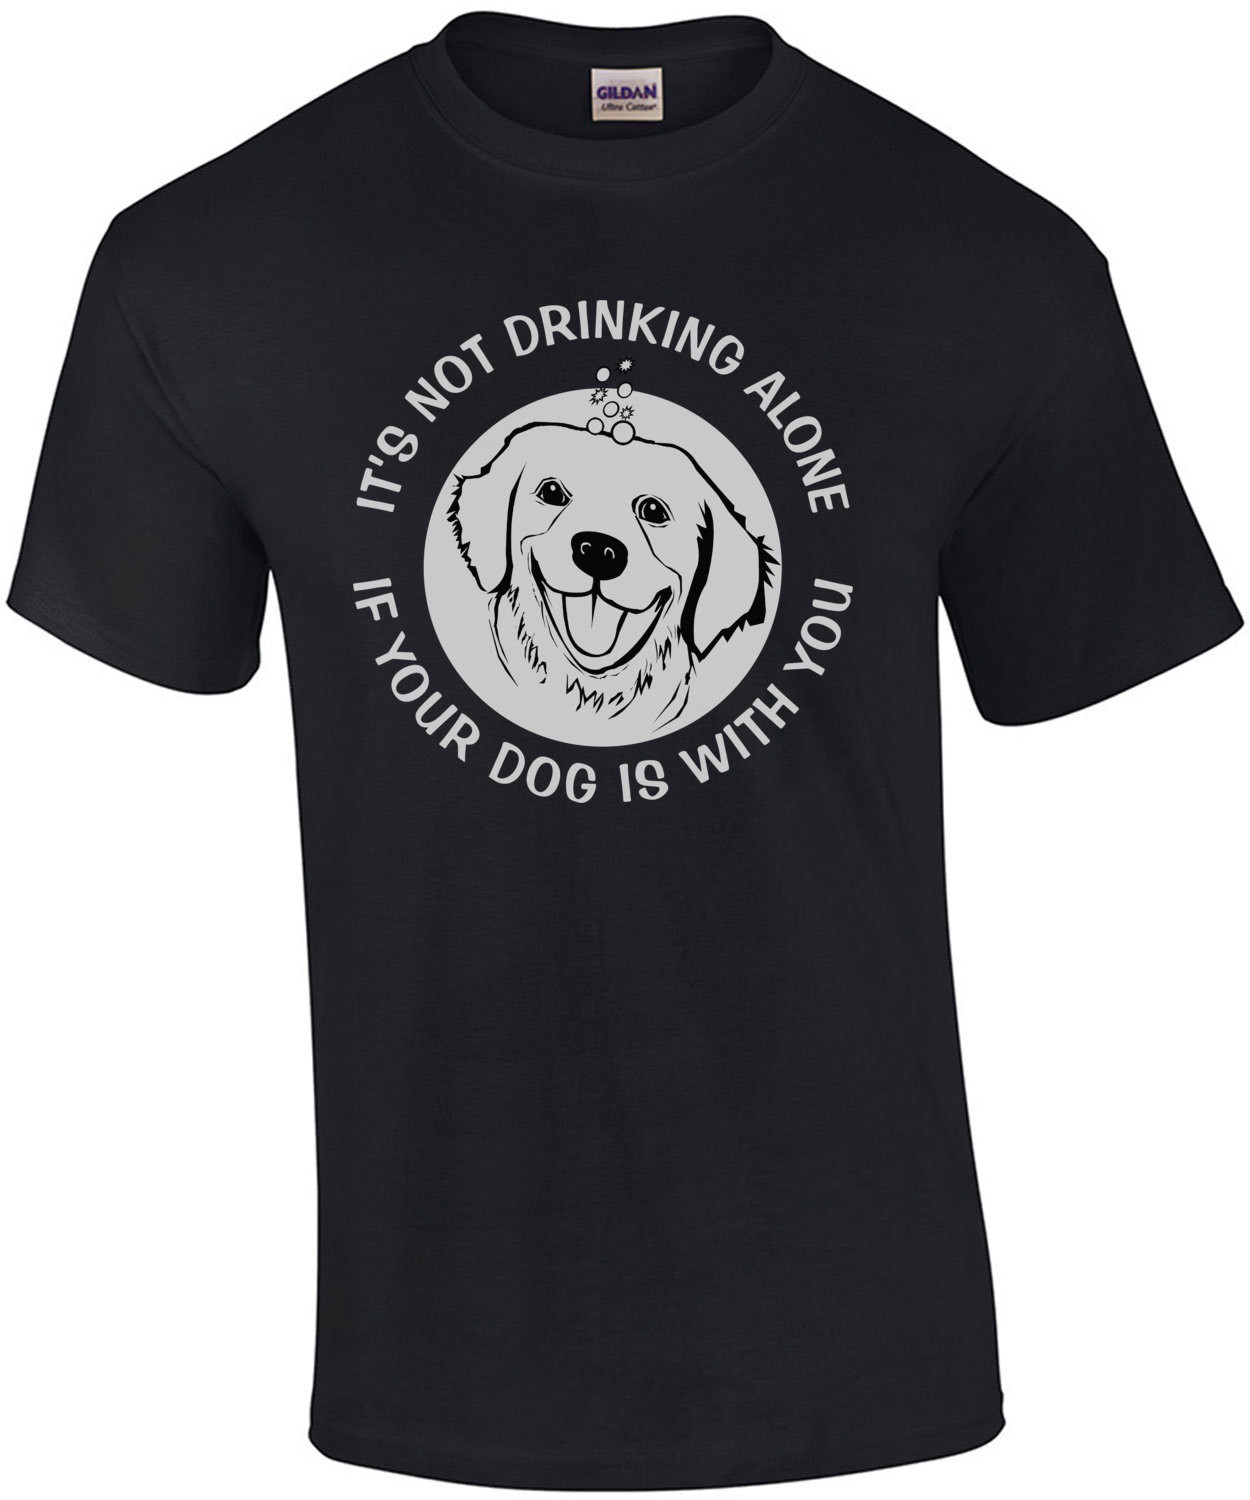 It's not drinking alone if your dog is with you - Funny Drinking T-Shirt